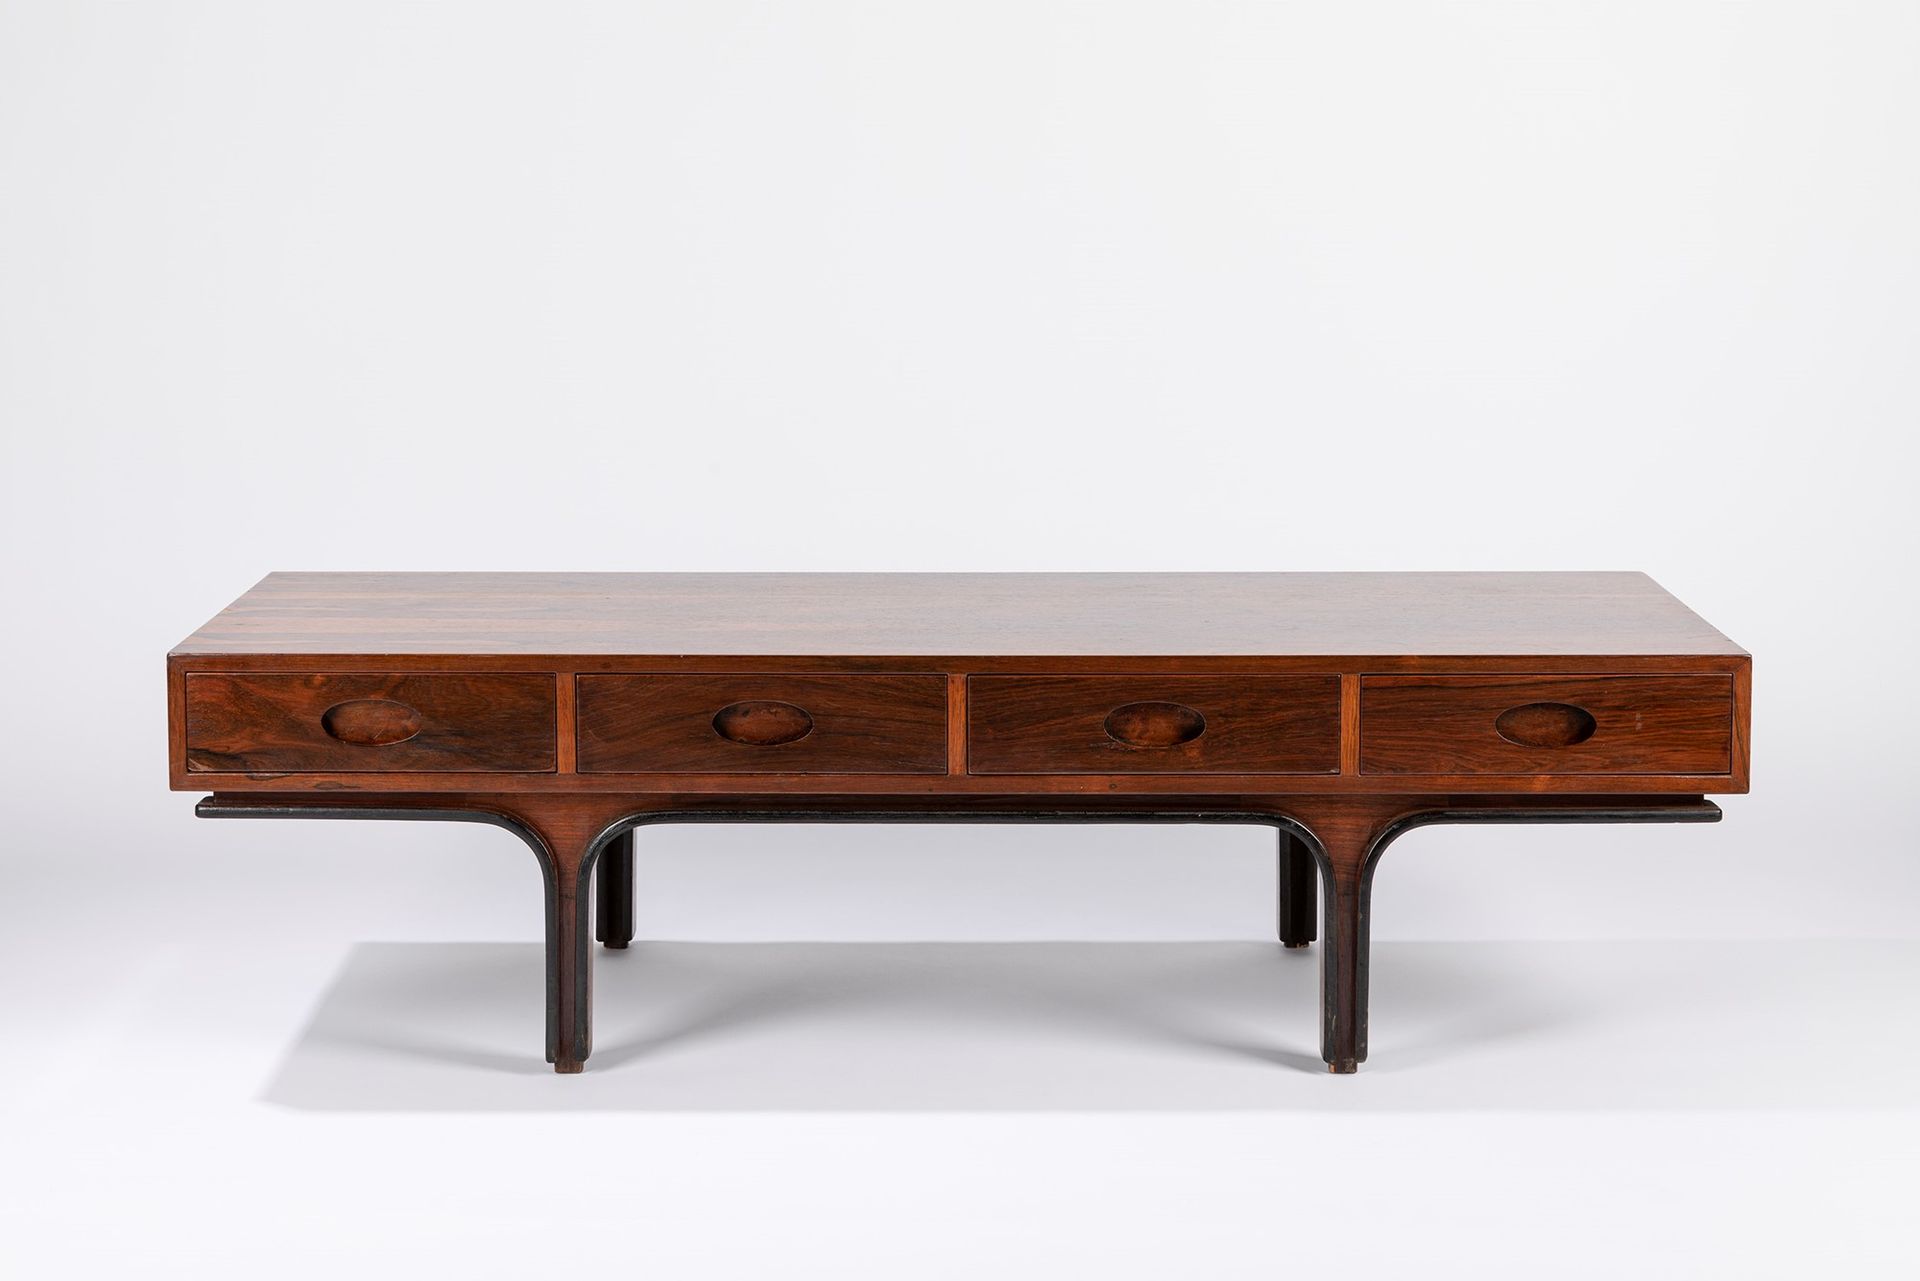 GIANFRANCO FRATTINI Coffee table, ca. 1960.

H 39 x 140 x 53 cm
wood and four dr&hellip;